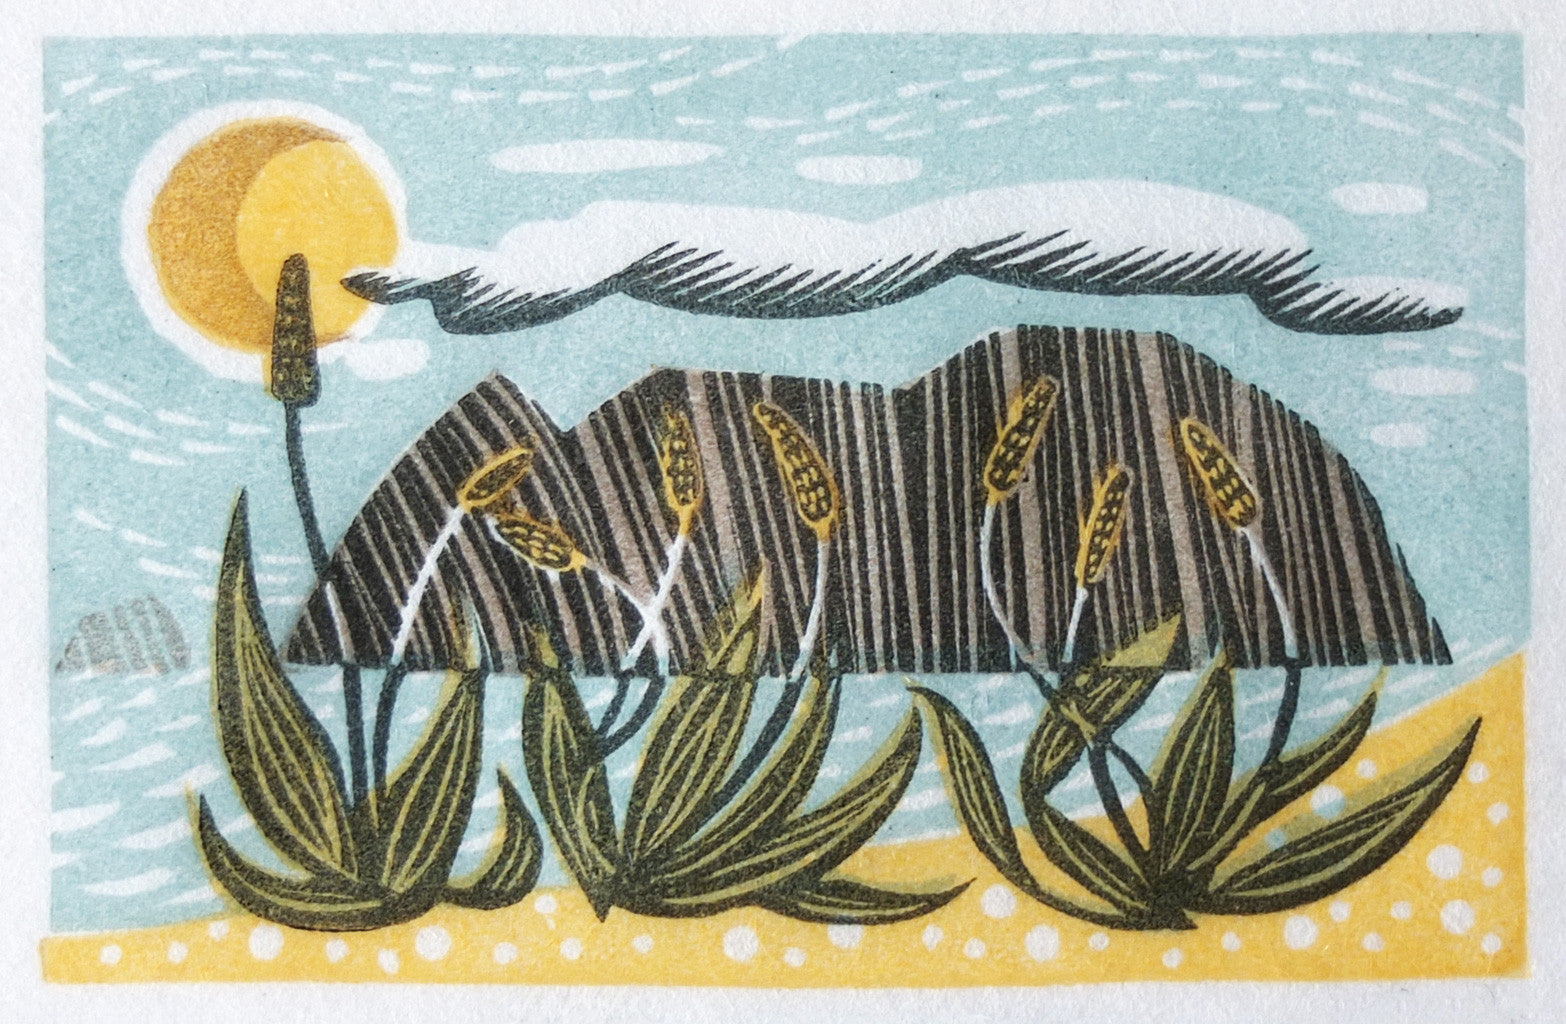 Sea Plantain - Angie Lewin - St. Jude's Prints